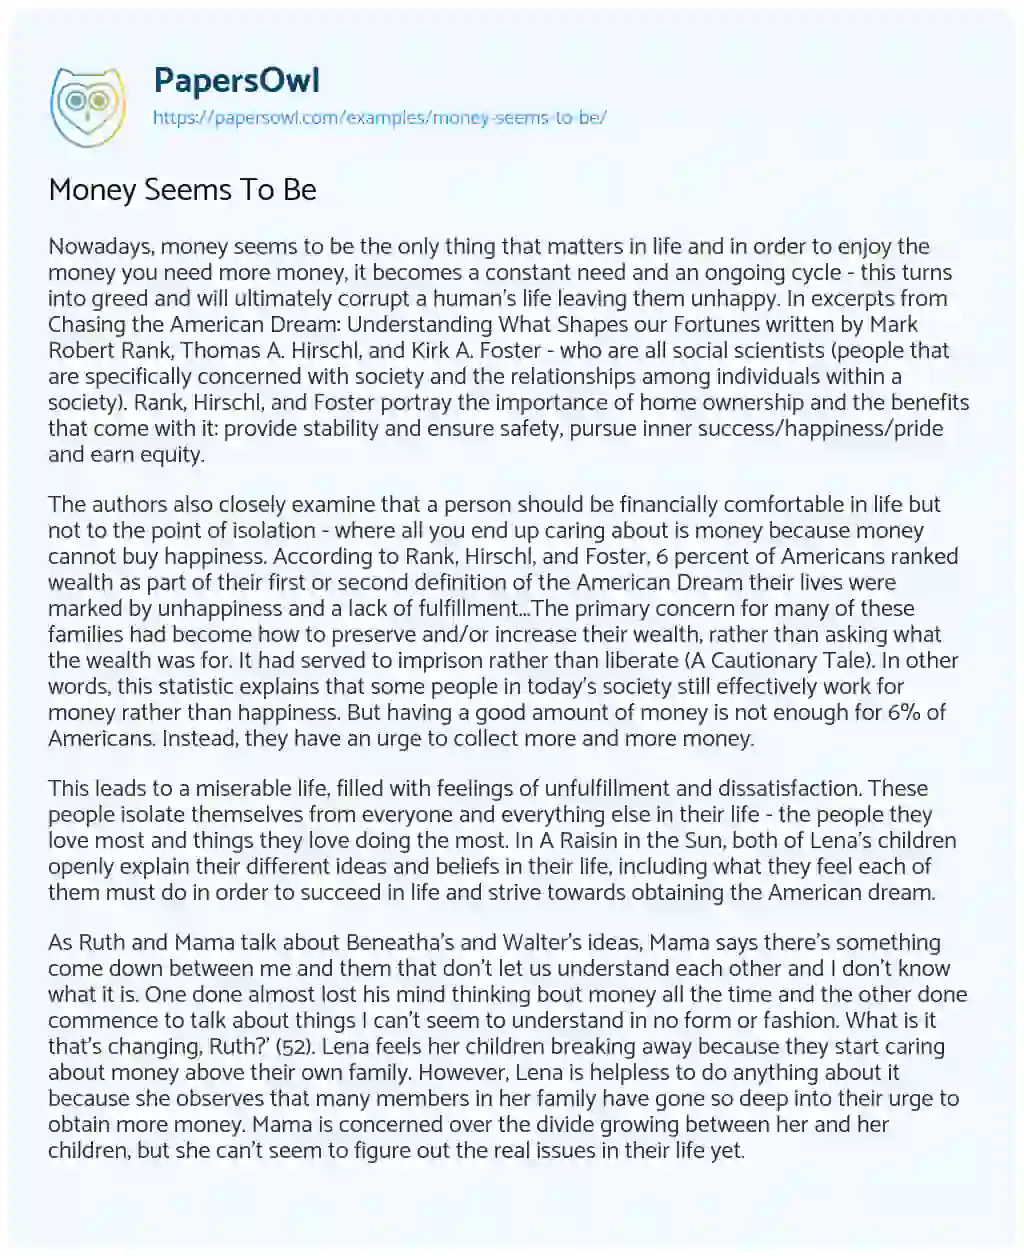 Essay on Money Seems to be